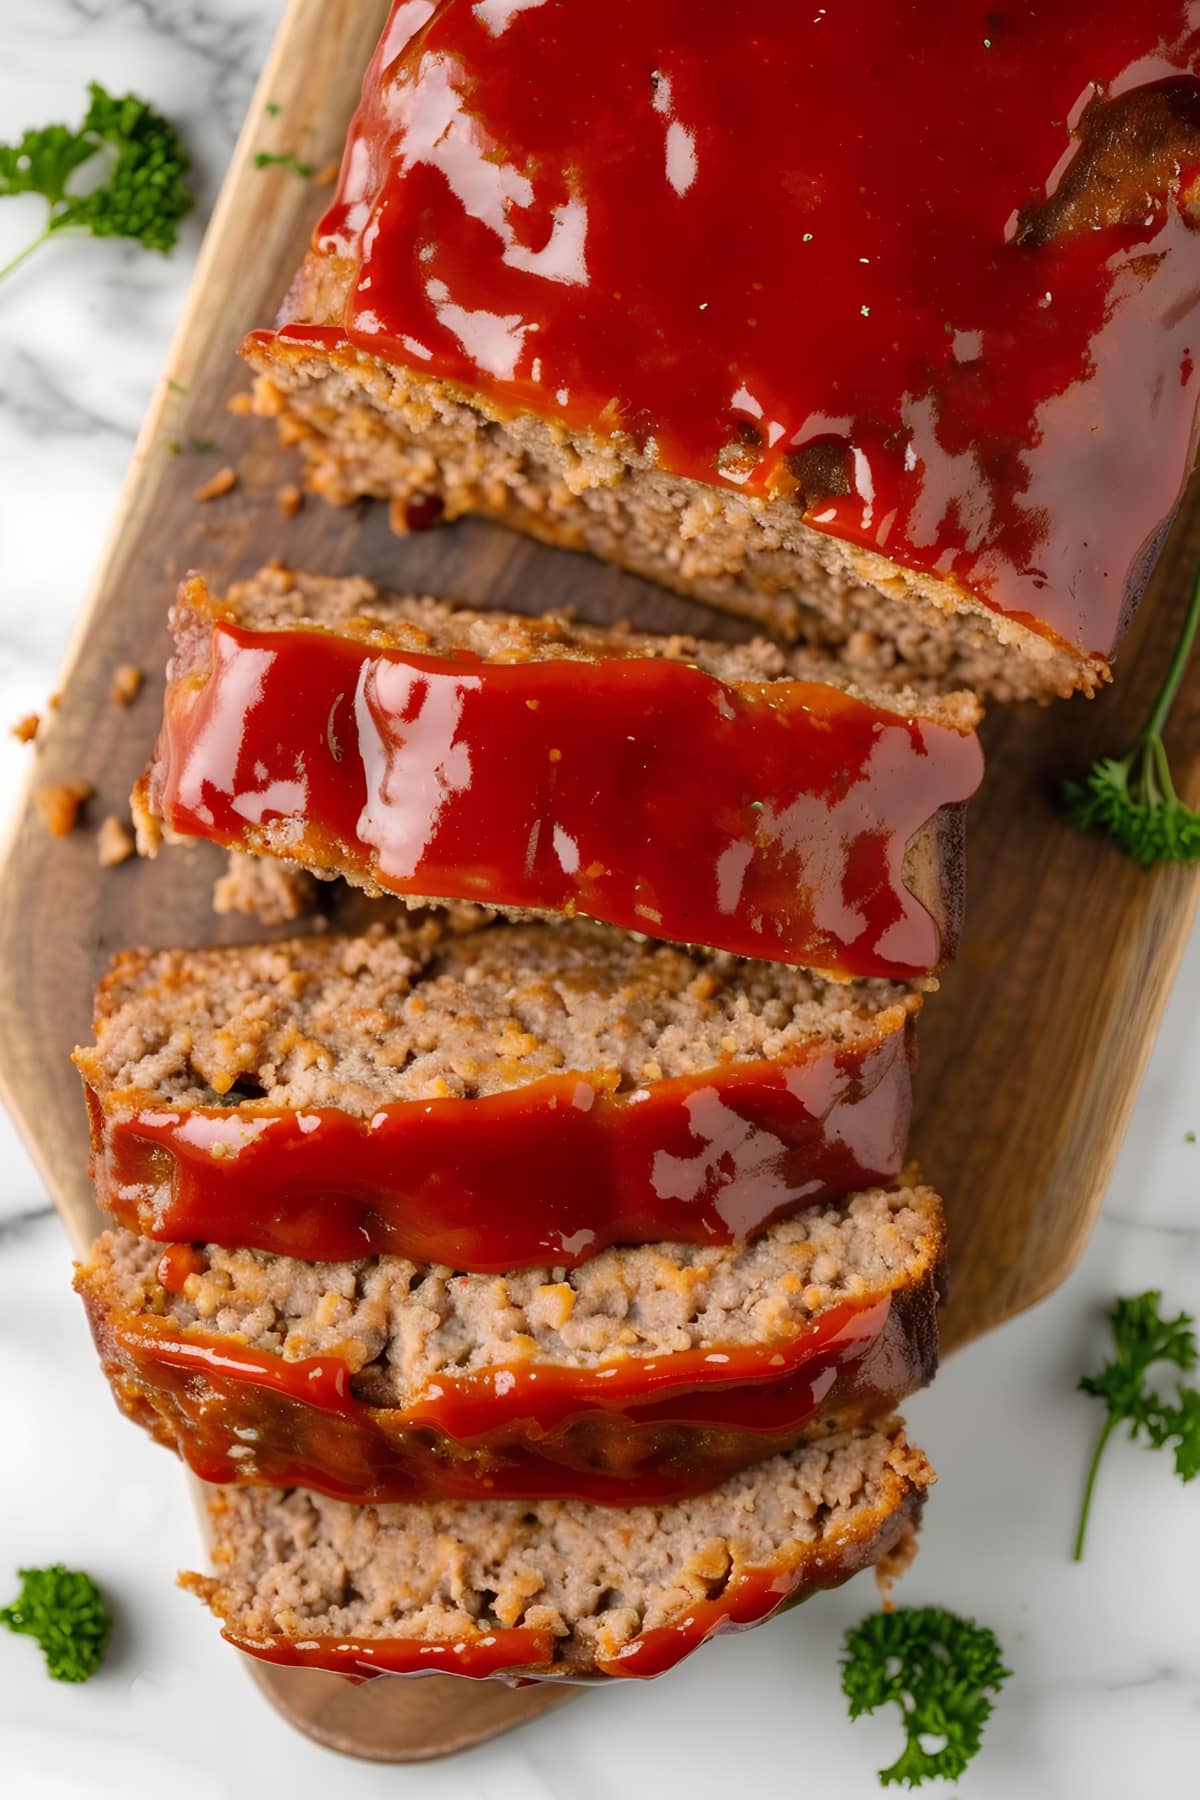 Sliced meatloaf with ketchup on a cutting board - a delicious and savory dish ready to be enjoyed